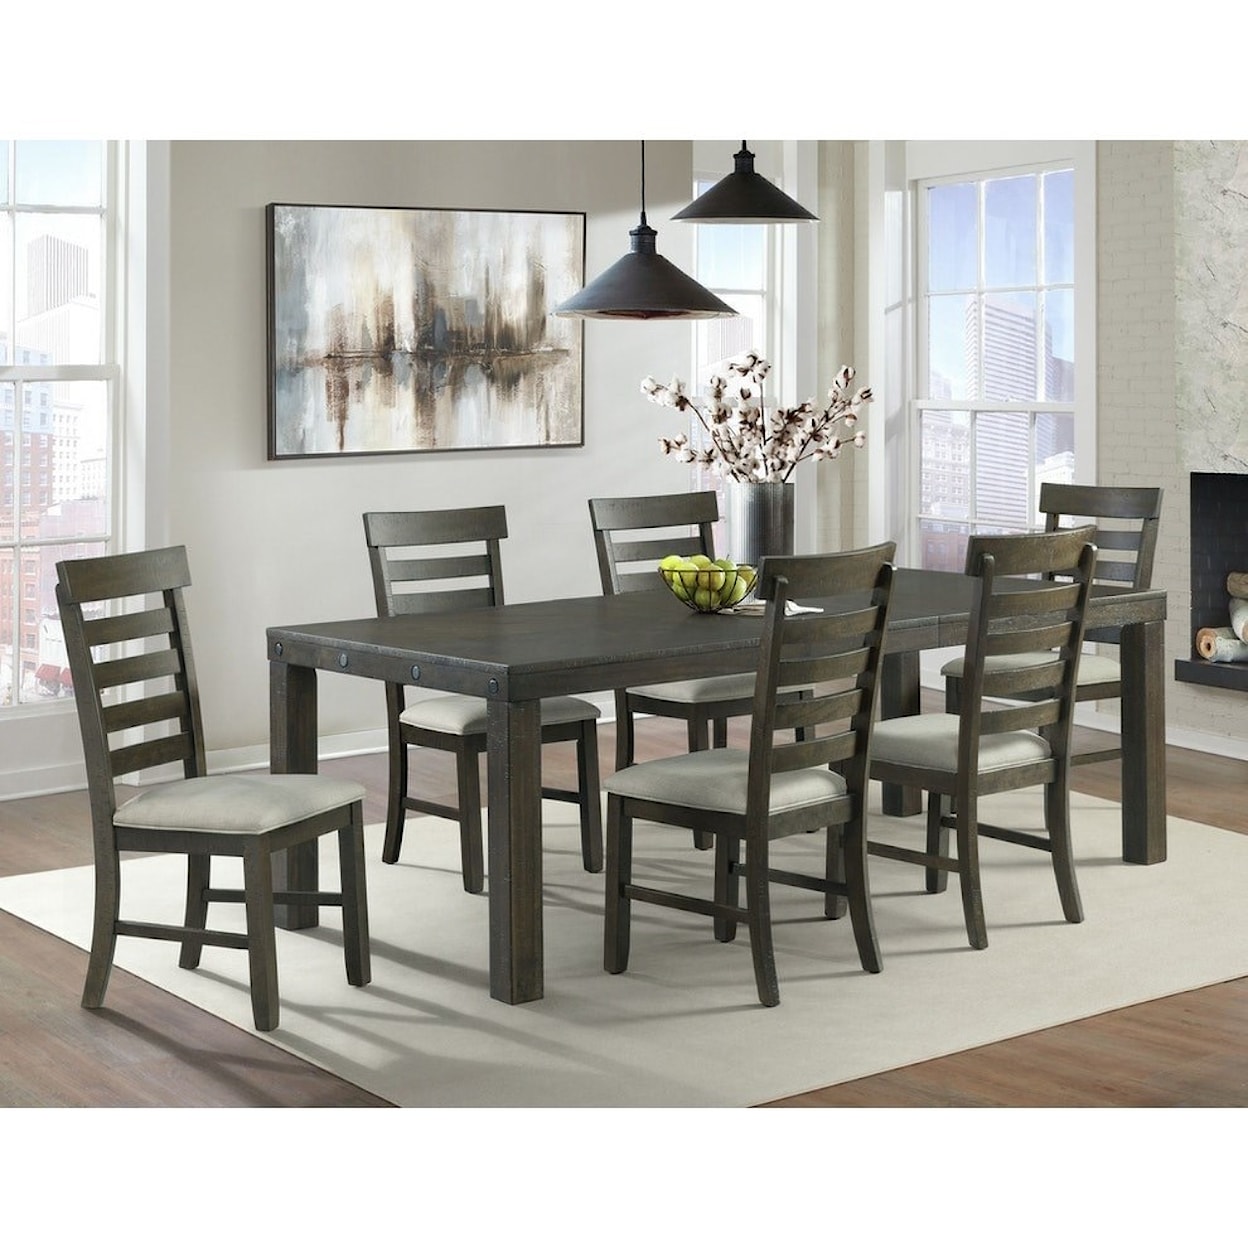 Elements International Colorado 7-Piece Dining Table and Chair Set